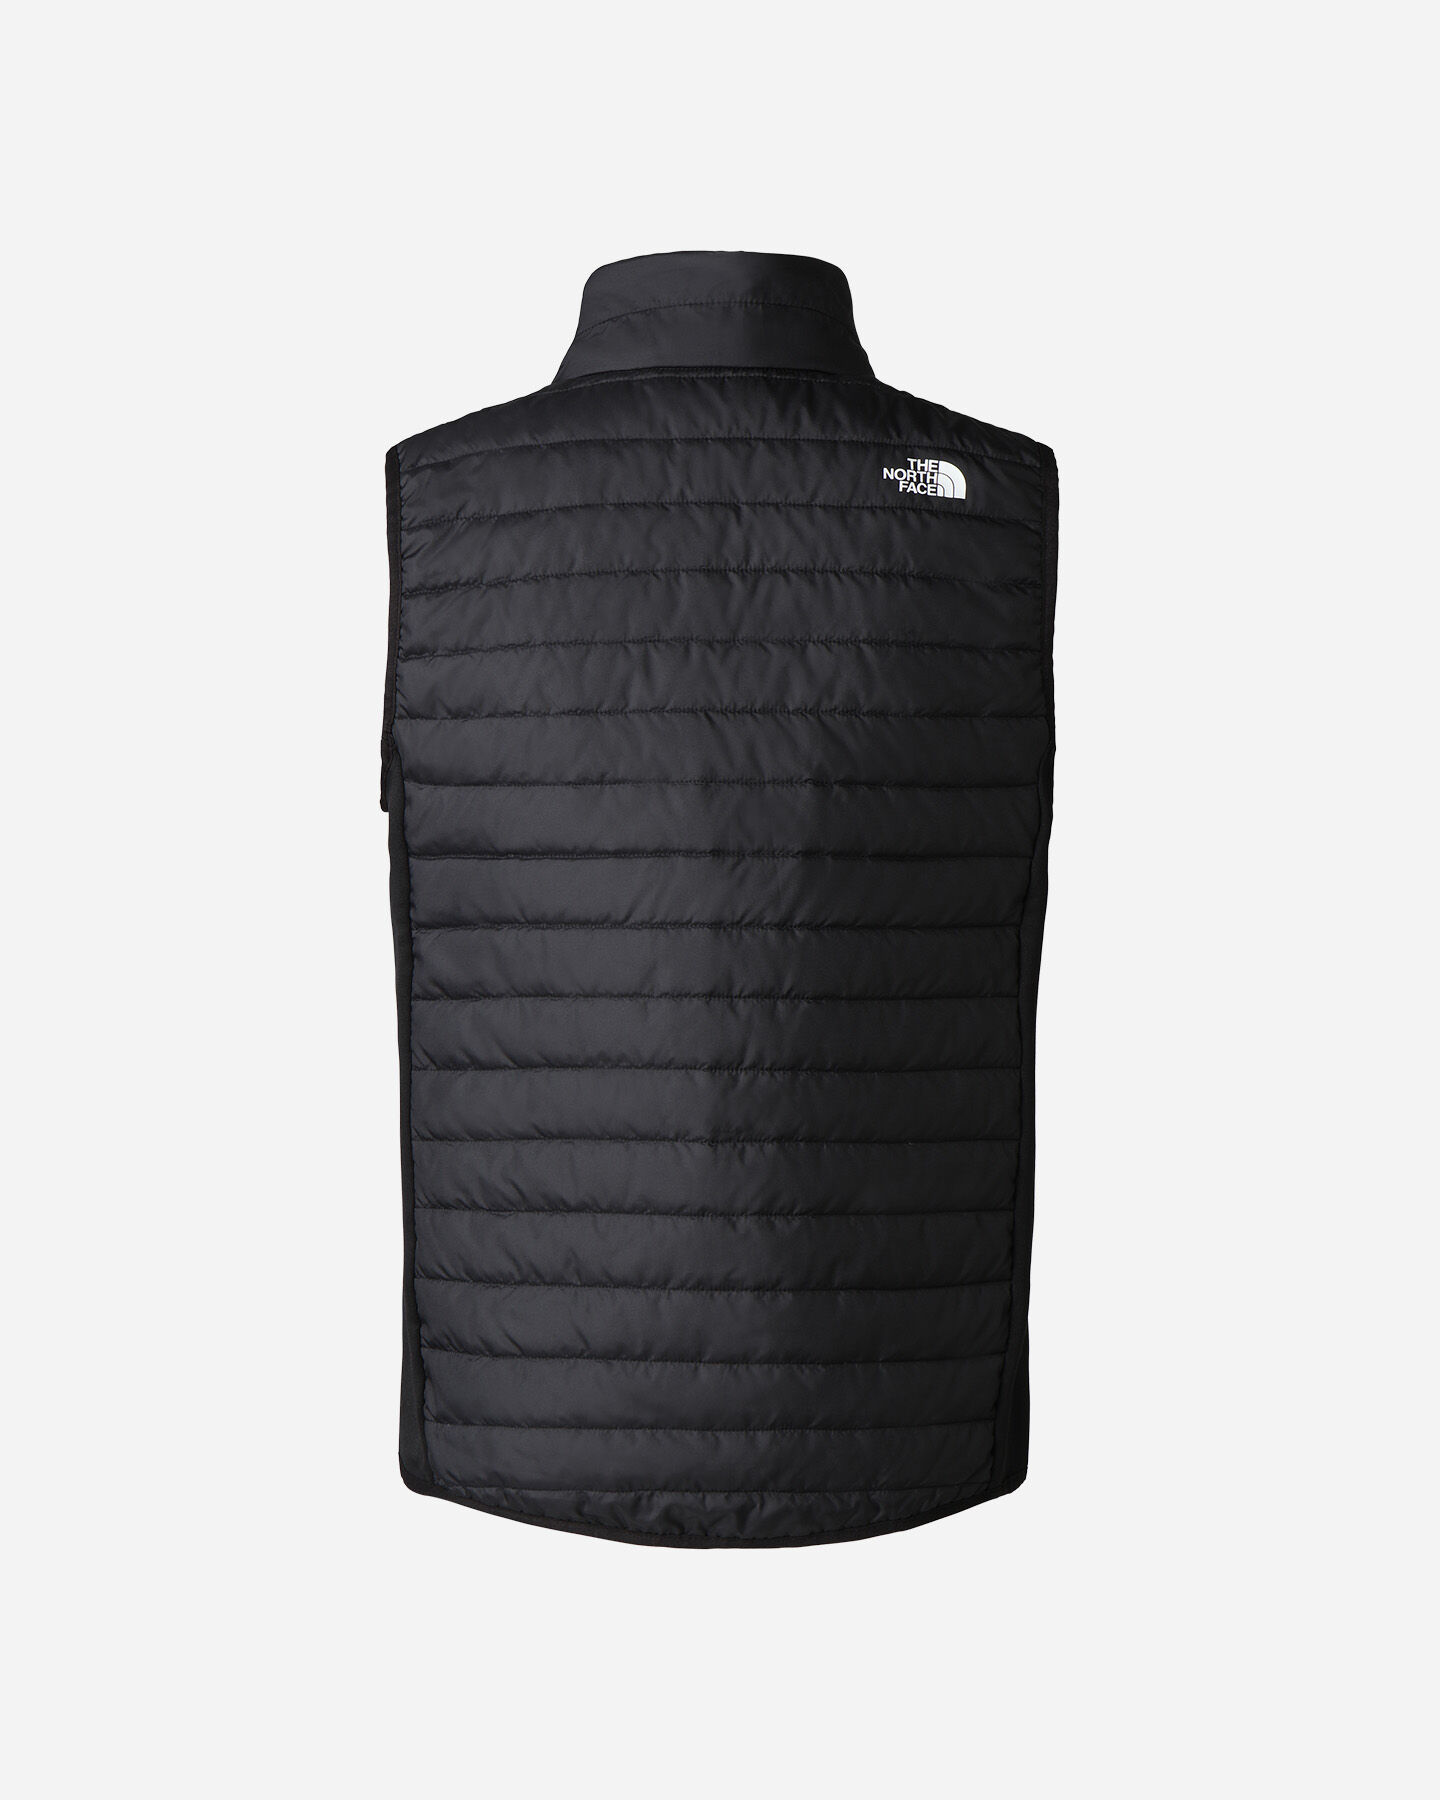  Gilet THE NORTH FACE CANYONLANDS HYBRID W S5475322|JK3|XS scatto 1